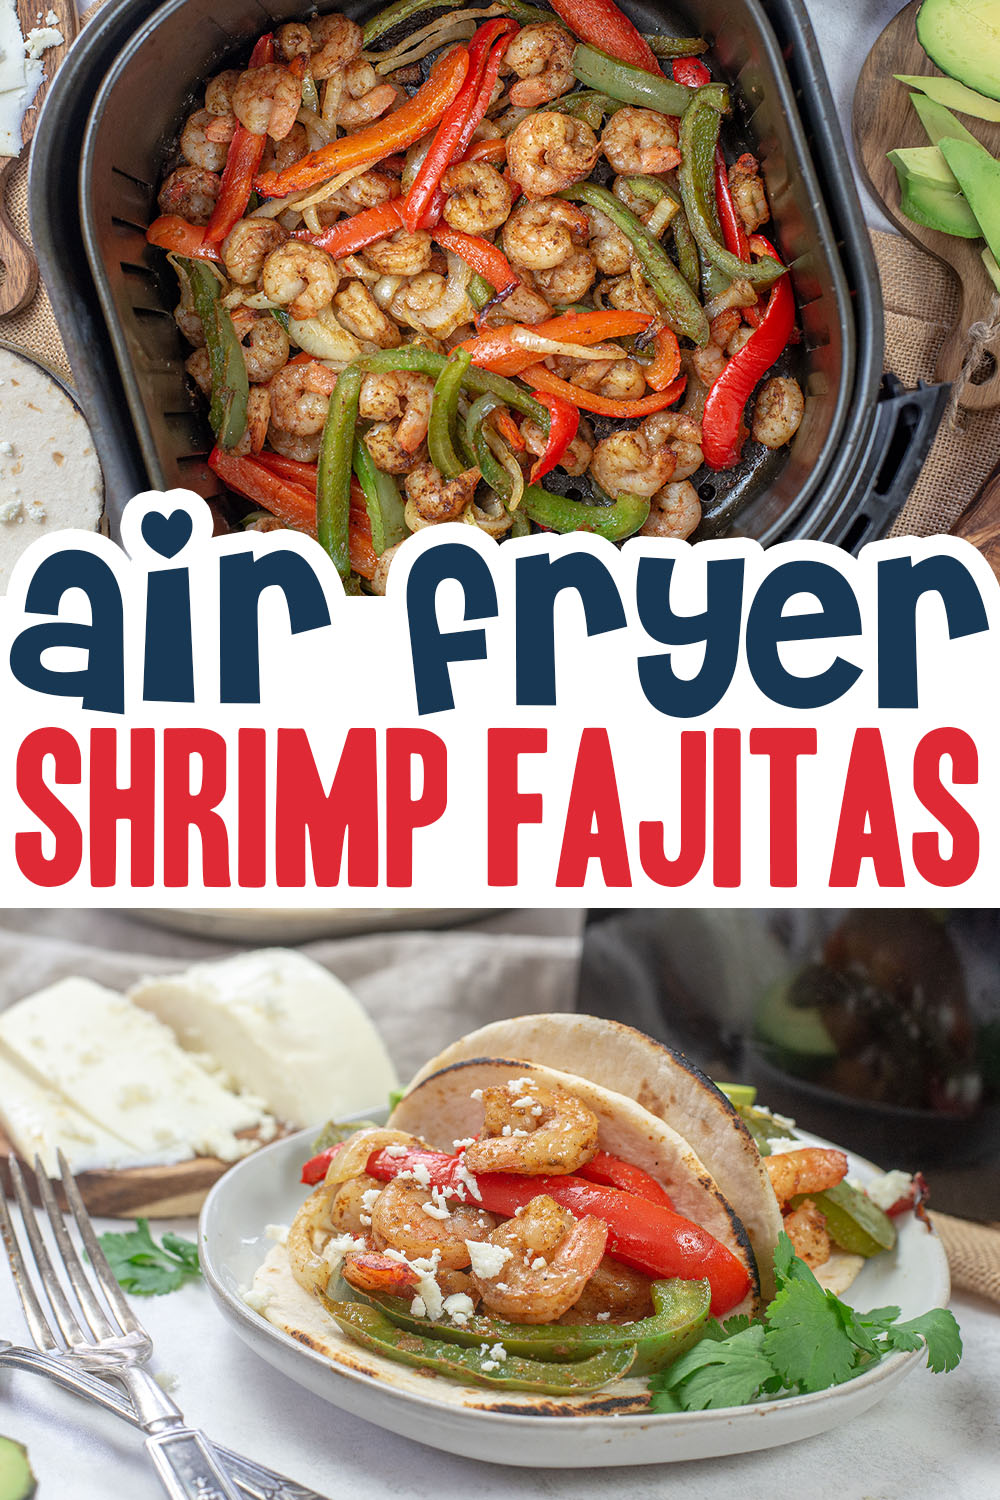 You will love air fryer shrimp fajitas.  They are easy to make, have a good texture, and are full of savory flavor.